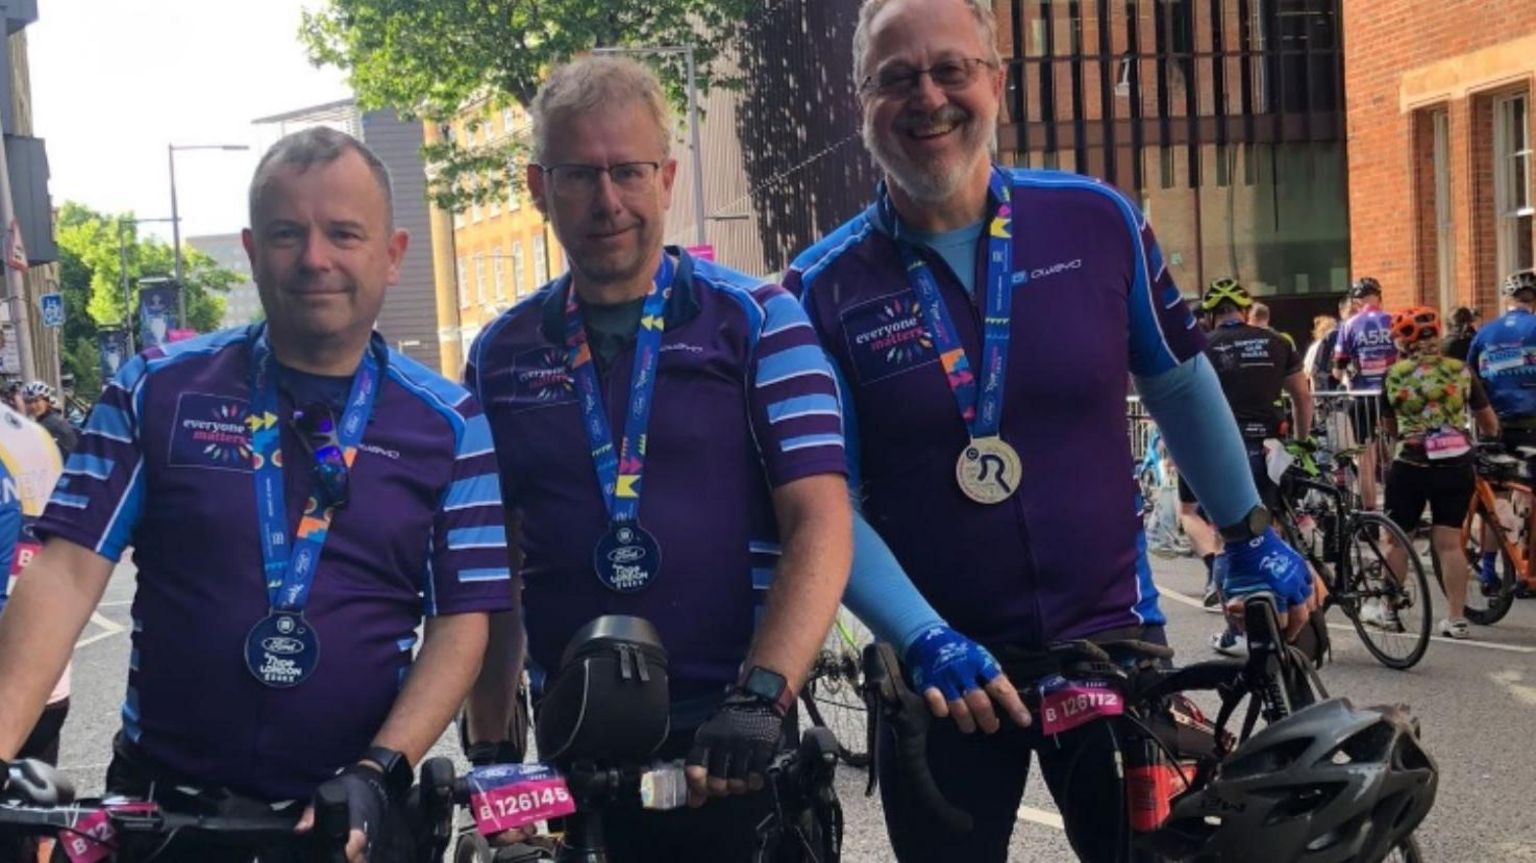 Three middle aged men in bright purple cycling jerseys stand beside their bikes wearing medals and smiling at the camera